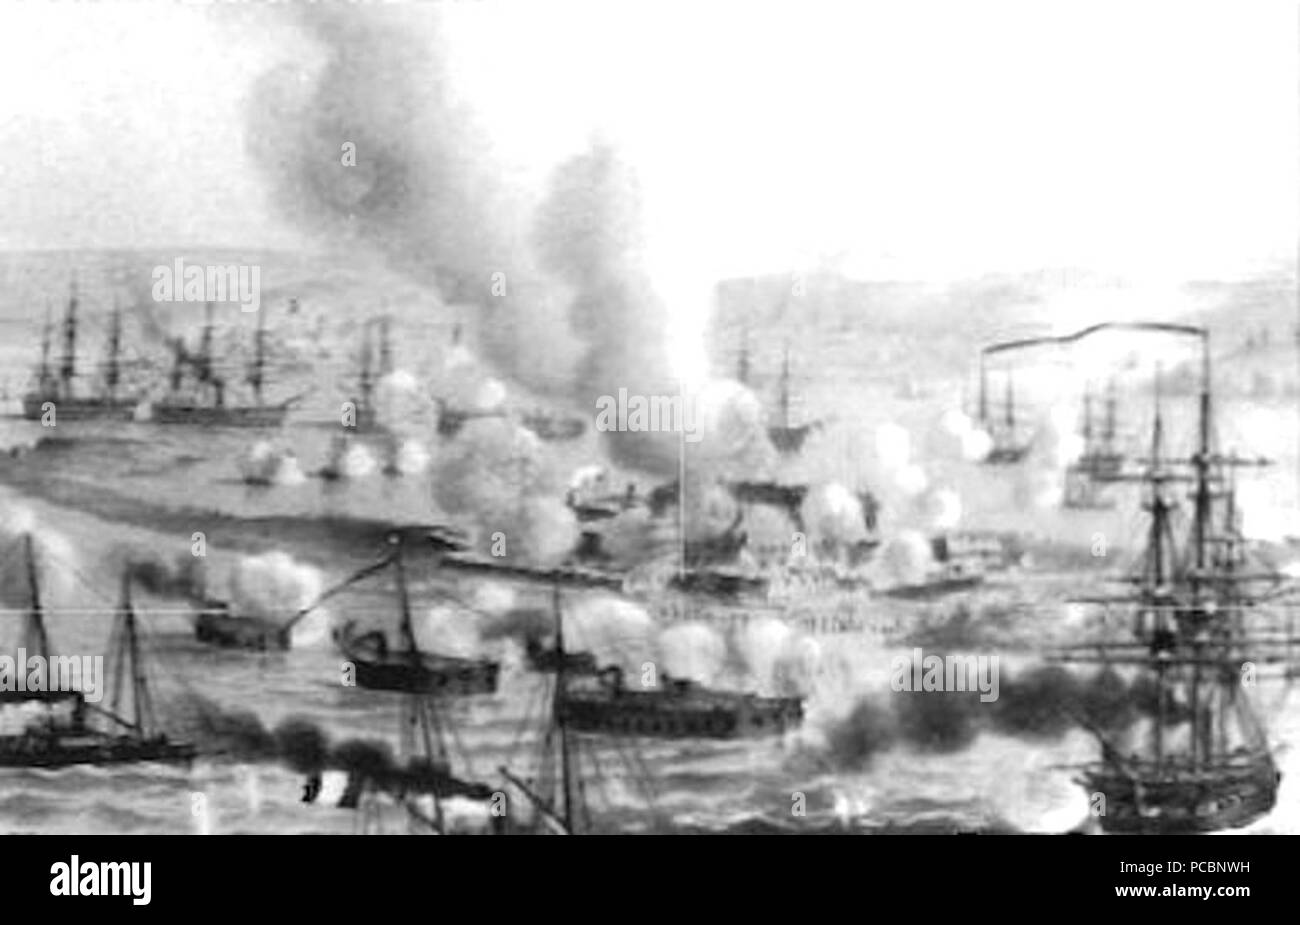 21 French ironclad floating batteries at Kinburn 1855 Stock Photo